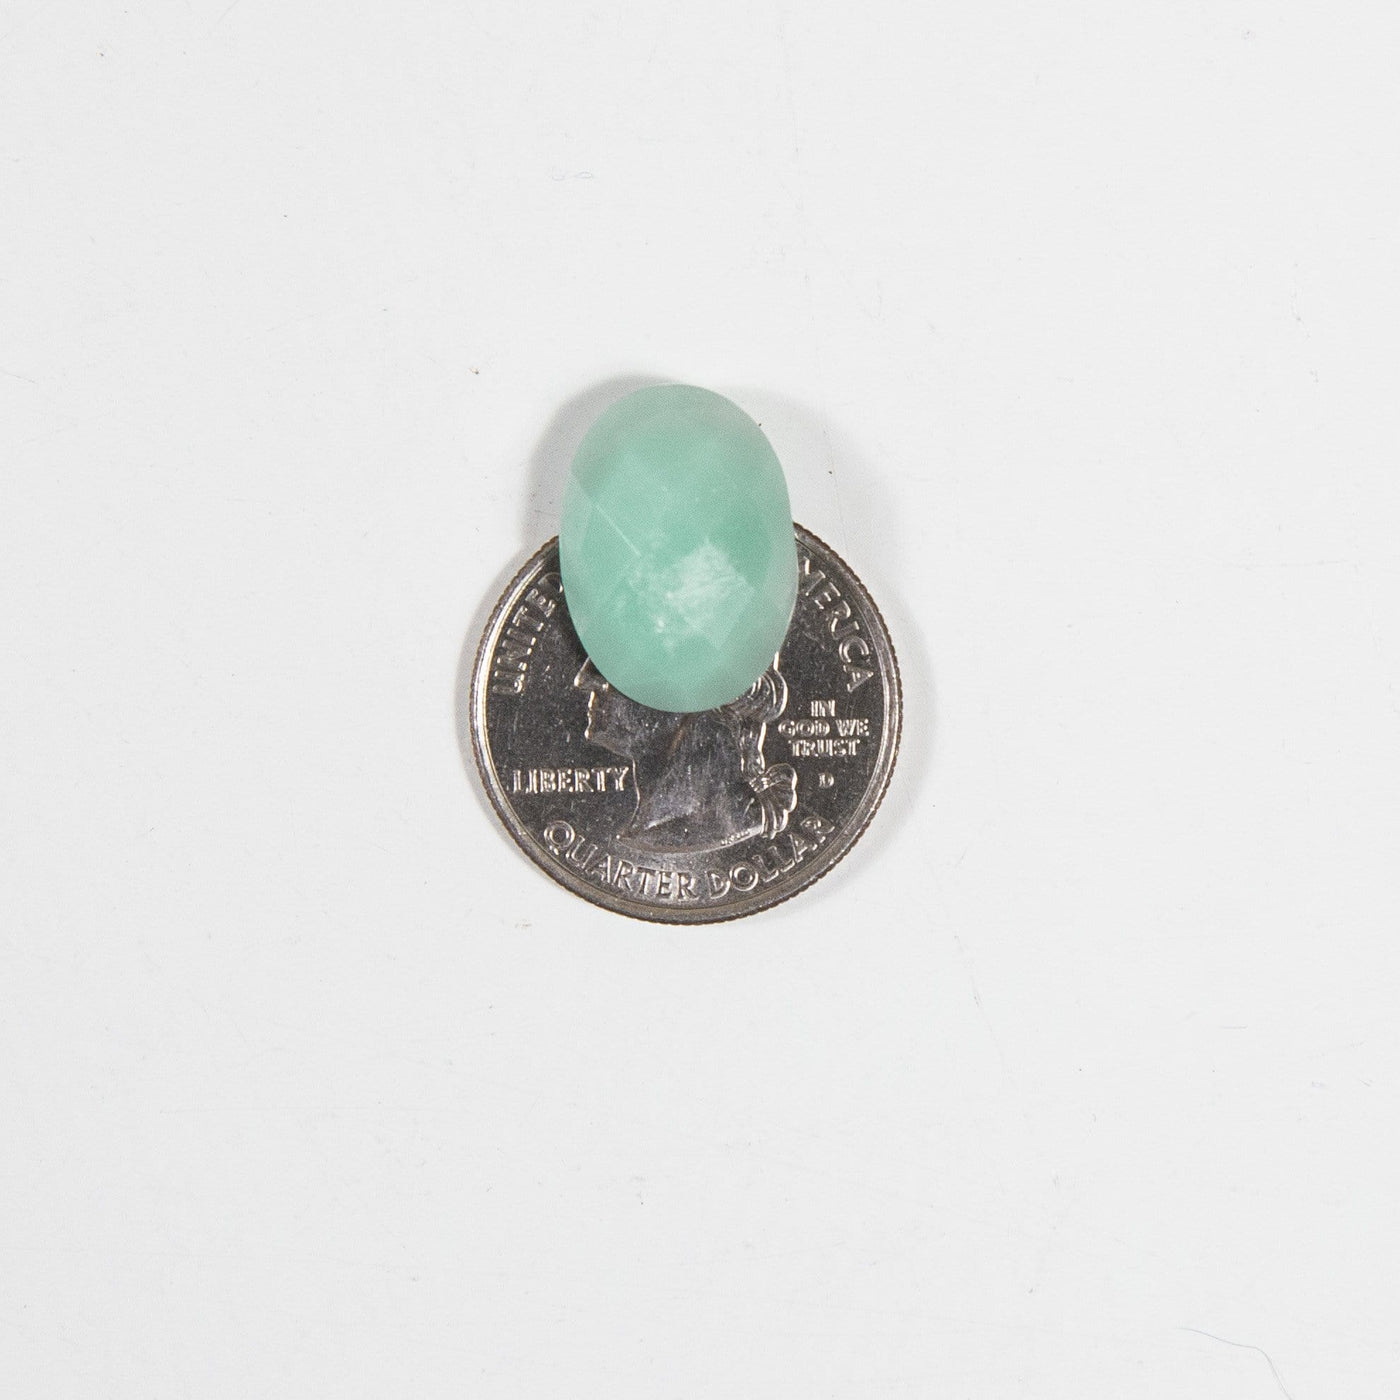 One of the cabochons is being displayed on top of a quarter for size reference. 